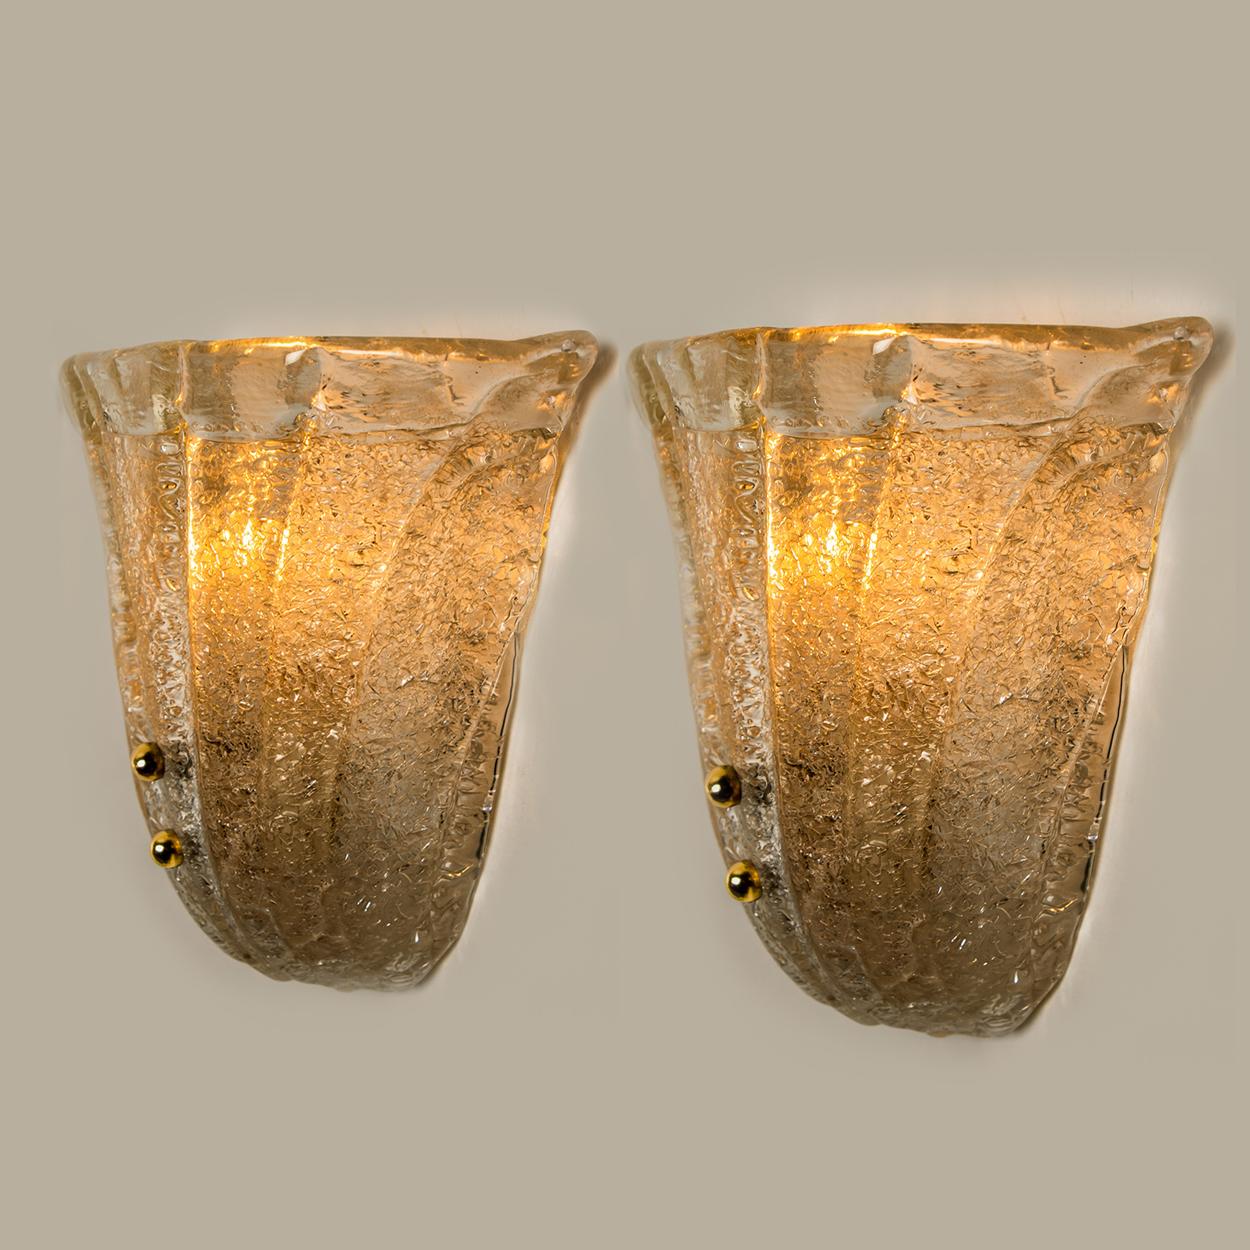 A pair of elegant and exquisite hand blown Hildebrand wall sconces. Each light fixture consists a tulip shaped glass leave surrounded by a blown cup. Mounted on a chrome frame with brass round crews. The leaves refract light beautifully.

Cleaned